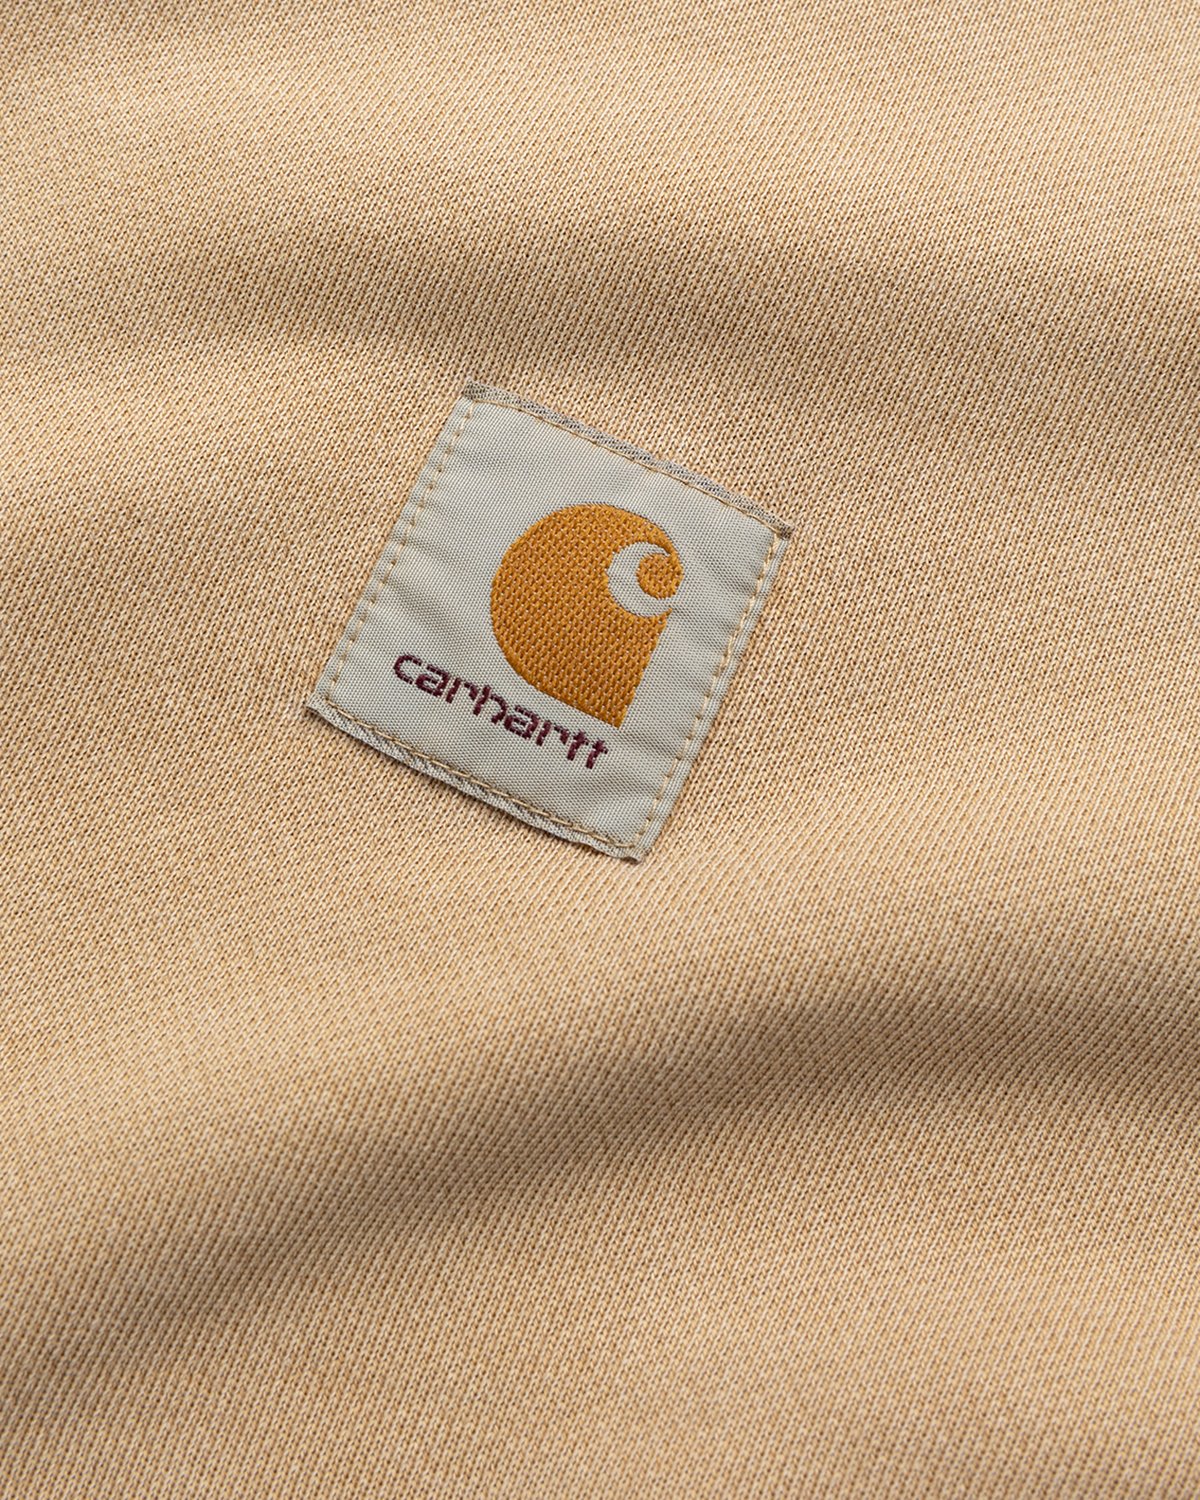 Carhartt WIP - Nelson Sweat Dusty Hamilton Brown - Clothing - Brown - Image 4